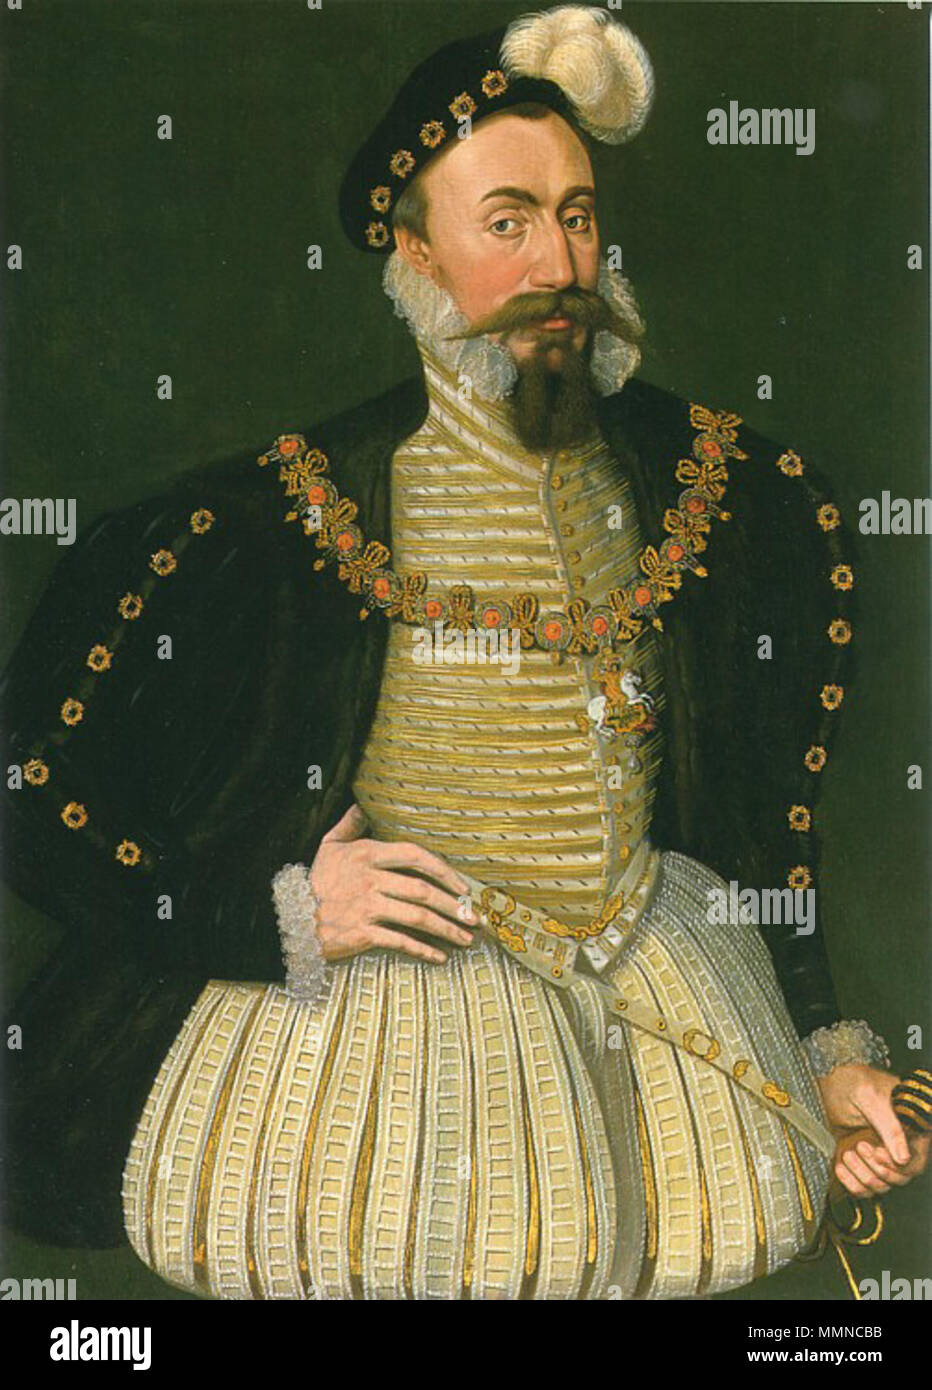 Portrait of Robert Dudley, Earl of Leicester. circa 1575. Leicester2 Stock Photo